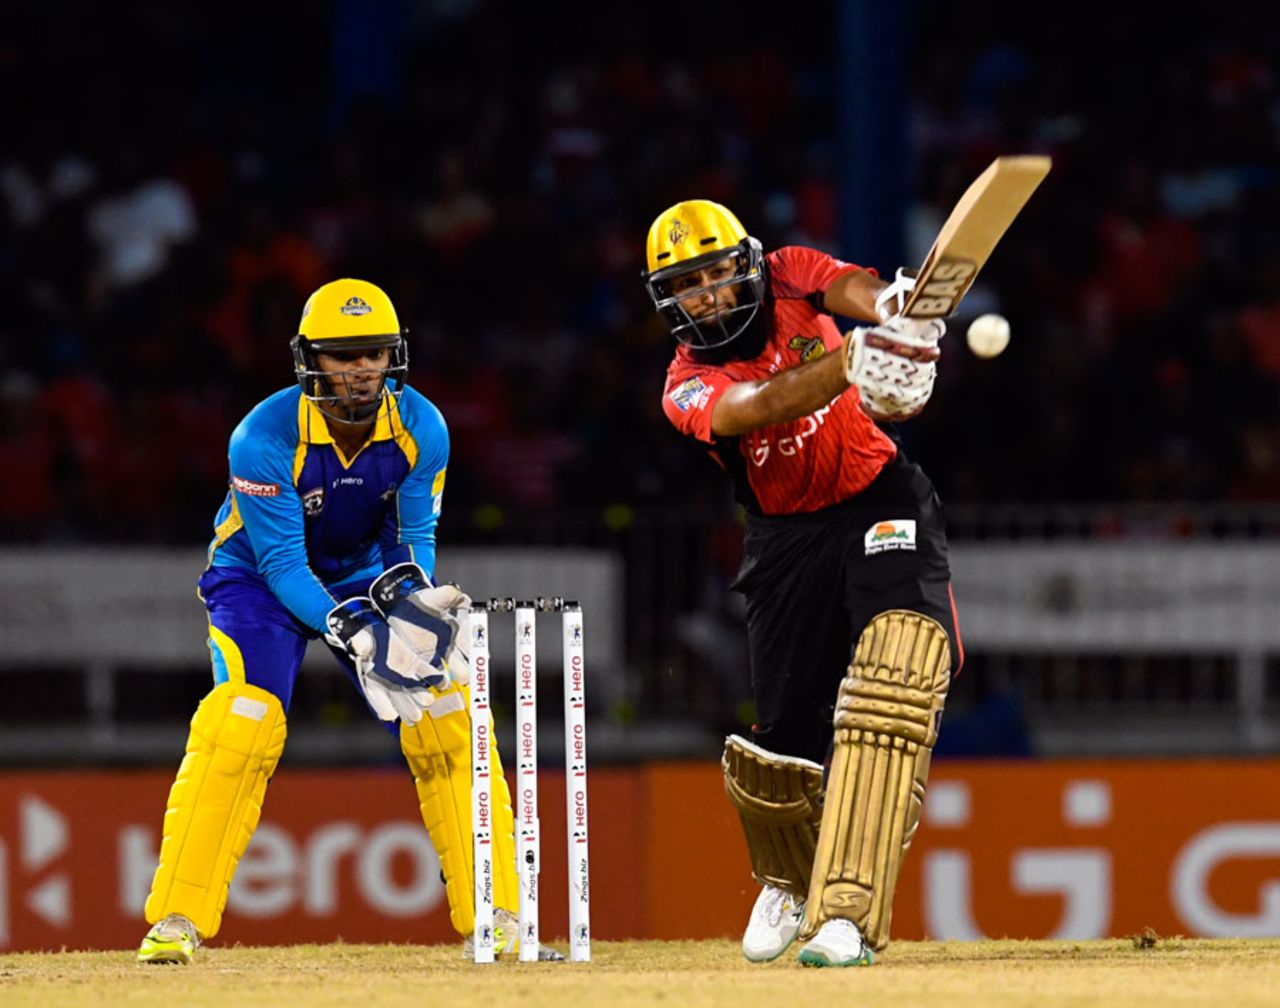 Hashim Amla hits out on his way to 81, Trinbago Knight Riders v Barbados Tridents, CPL 2016, Port-of-Spain, July 1, 2016 